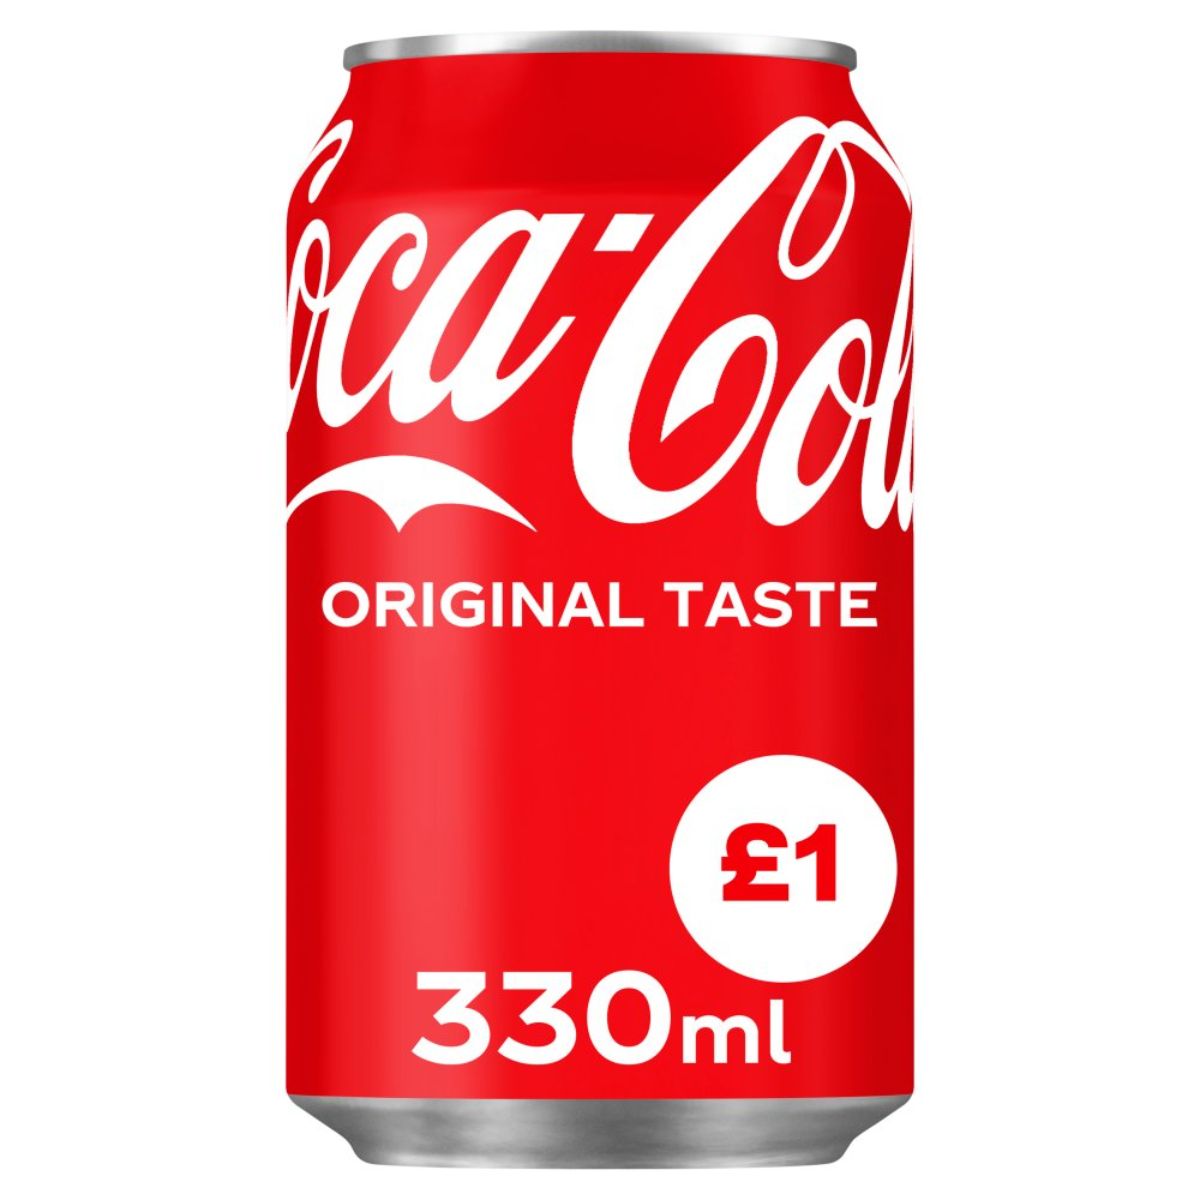 A can of Coca Cola - Original Taste - 330ml on a white background.